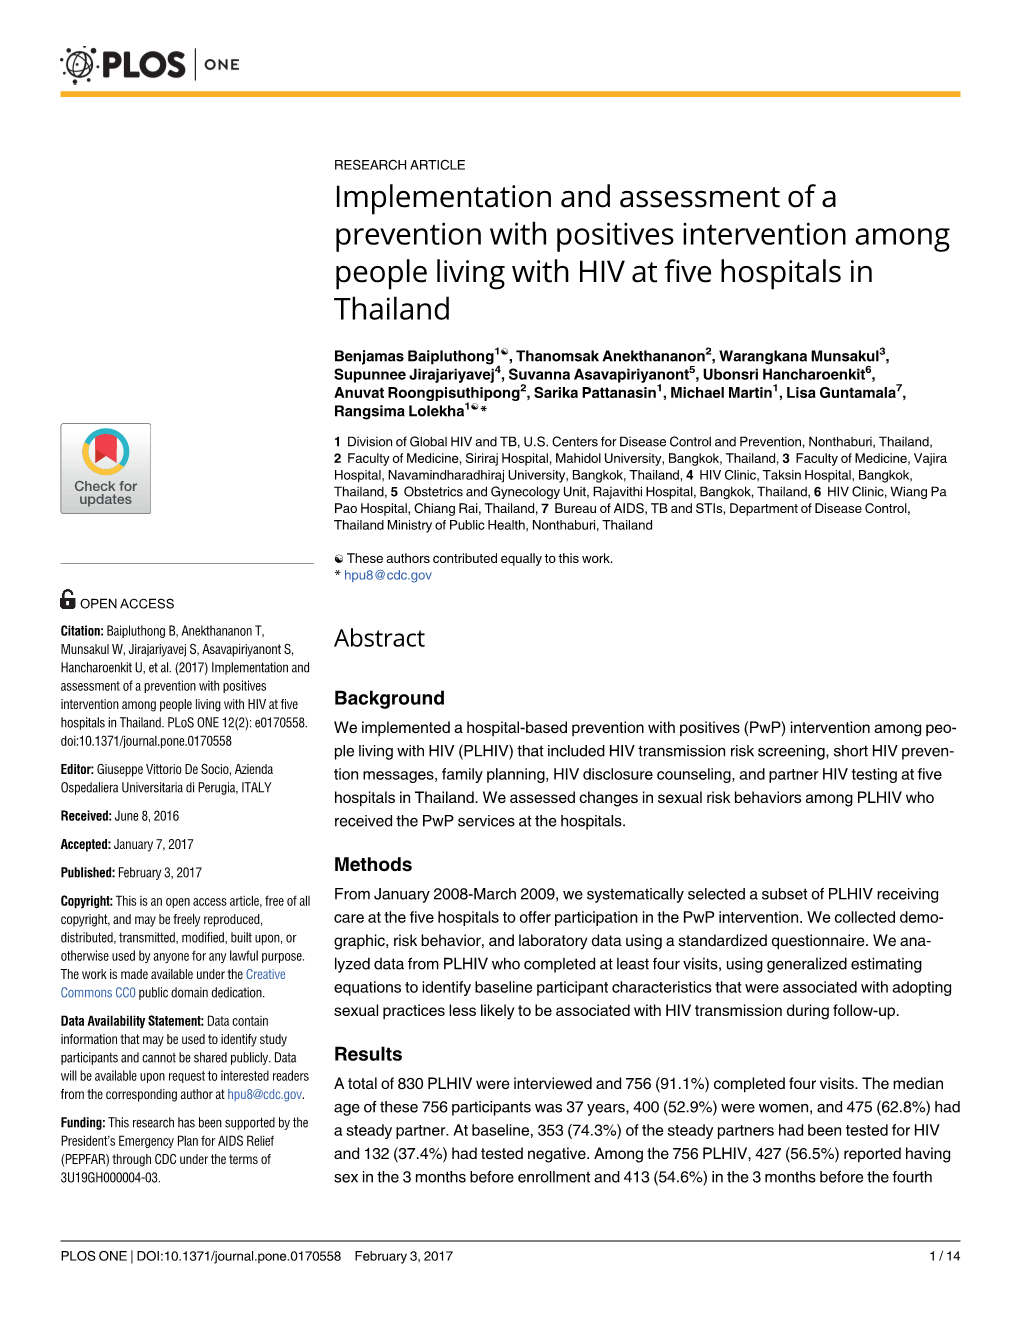 Implementation and Assessment of a Prevention with Positives Intervention Among People Living with HIV at Five Hospitals in Thailand